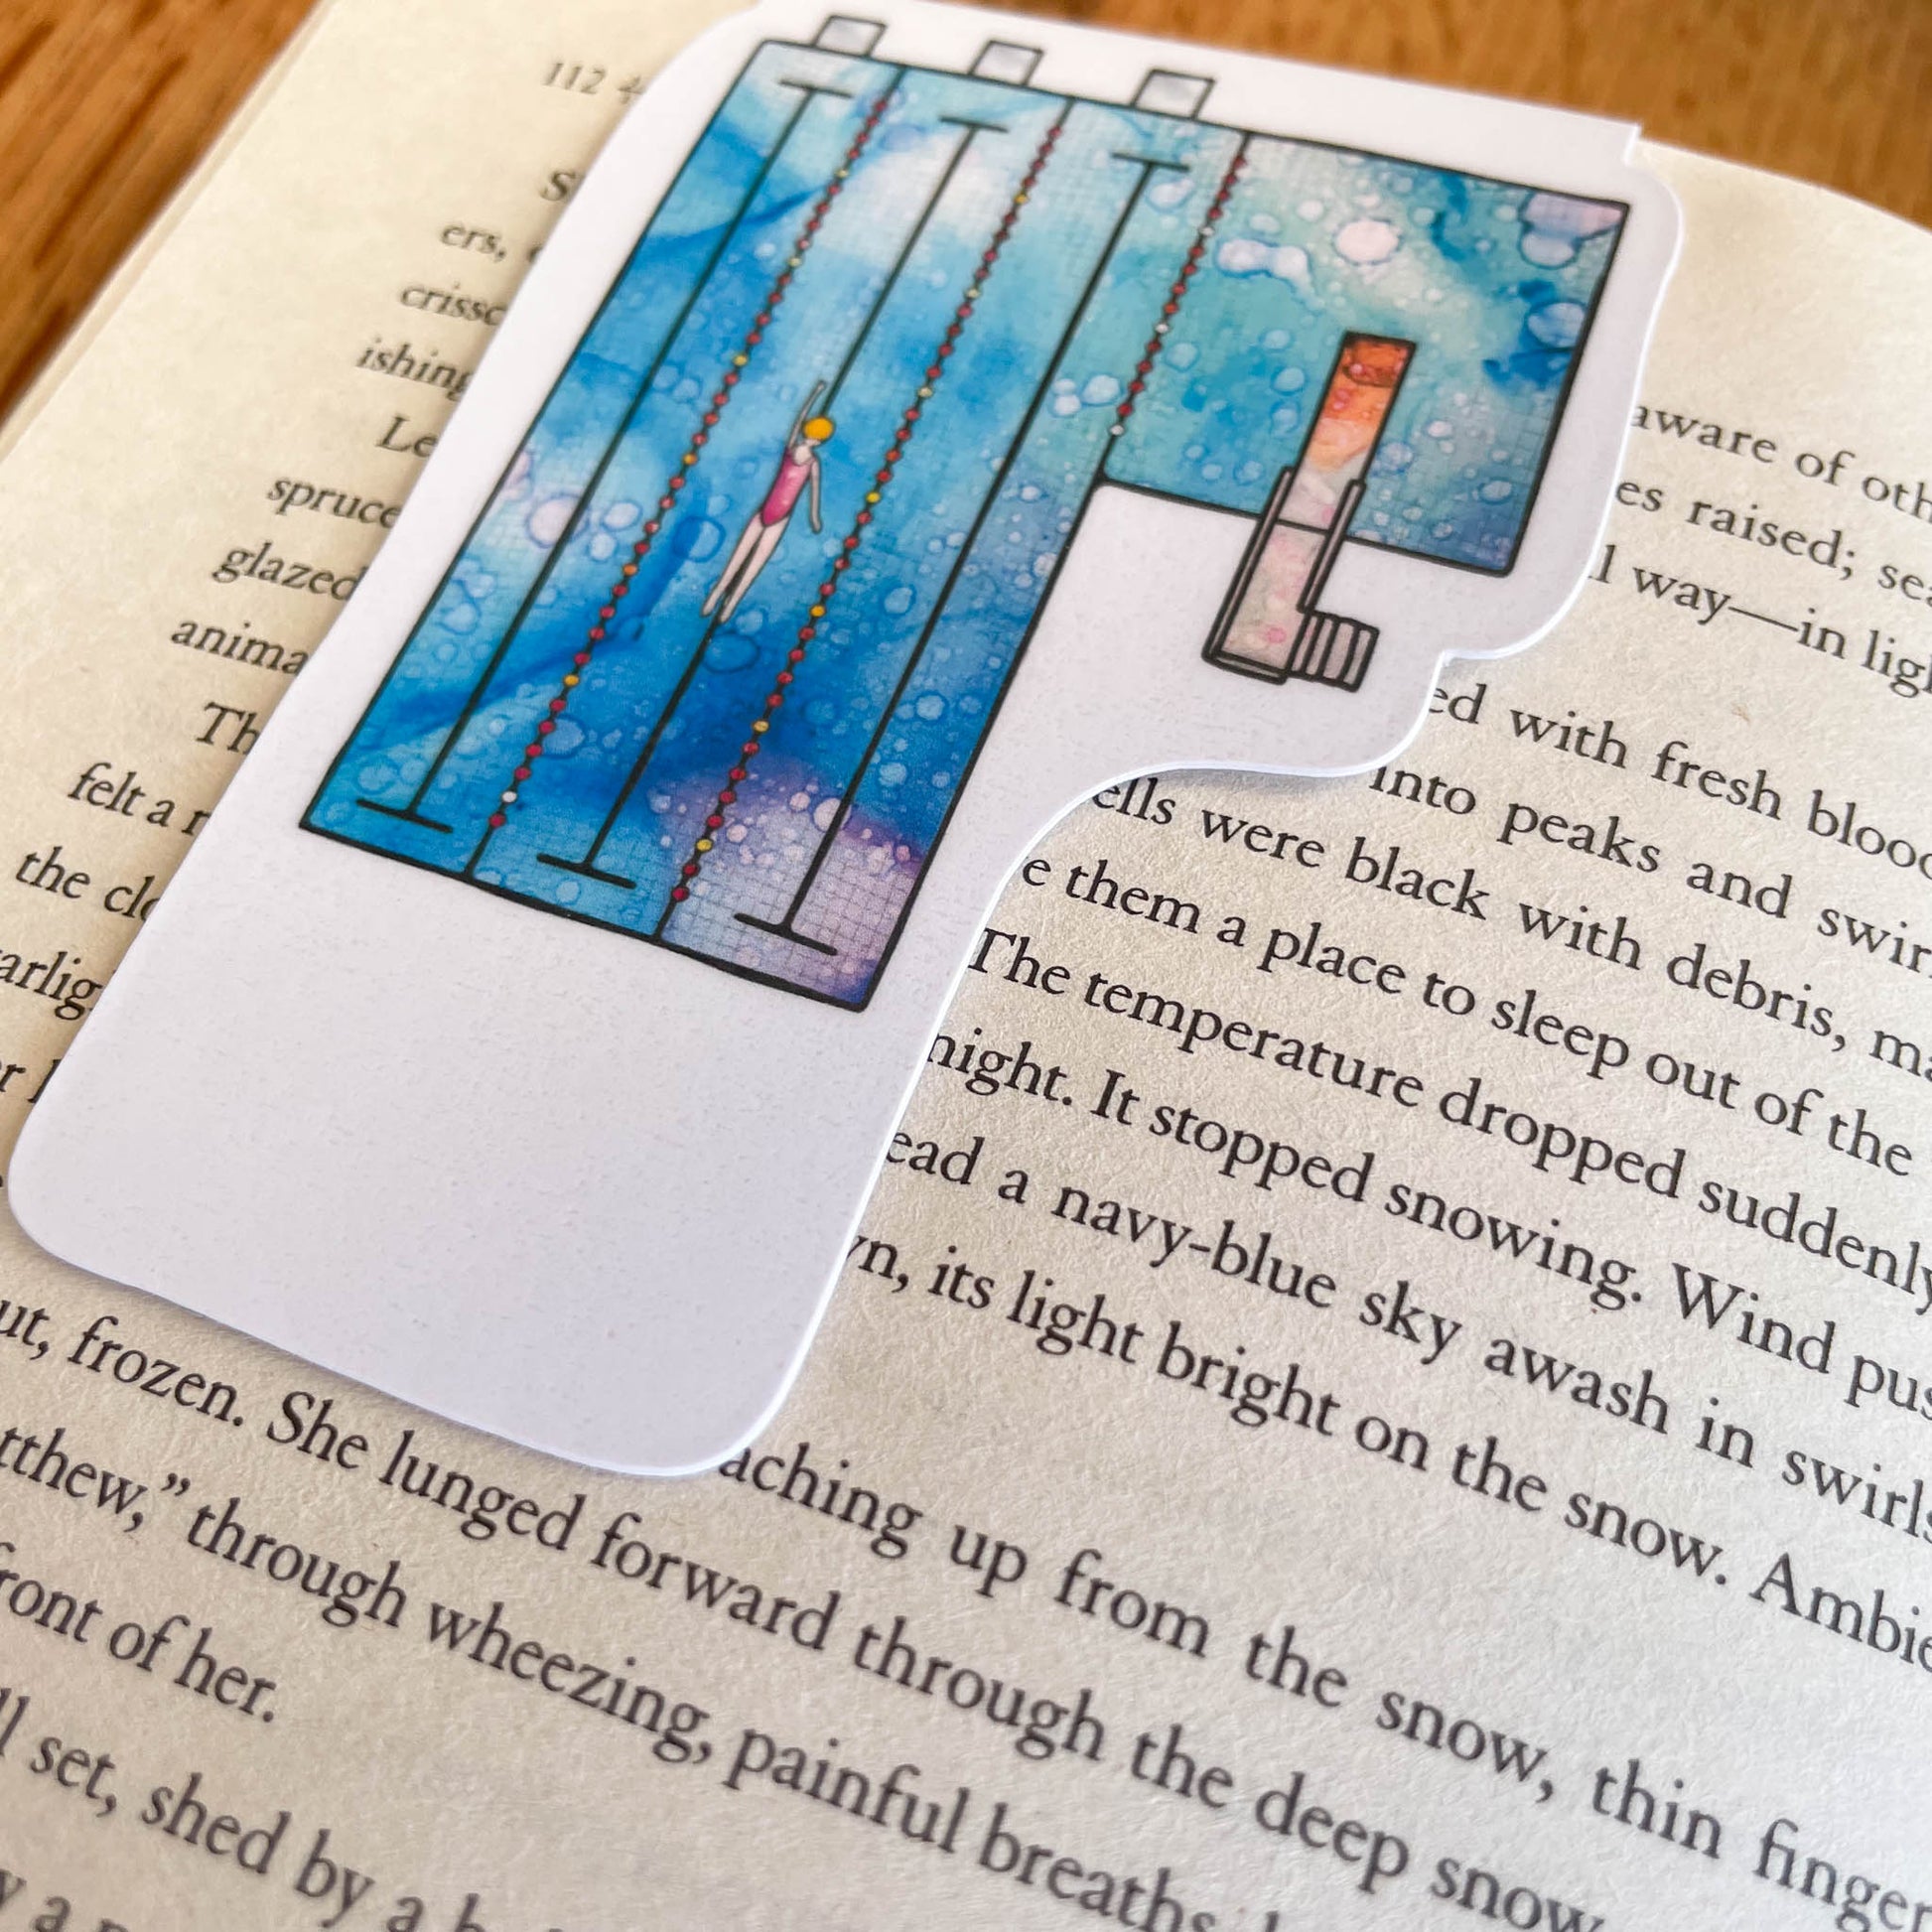 Laminated swimming pool magnetic bookmark for marking pages in books